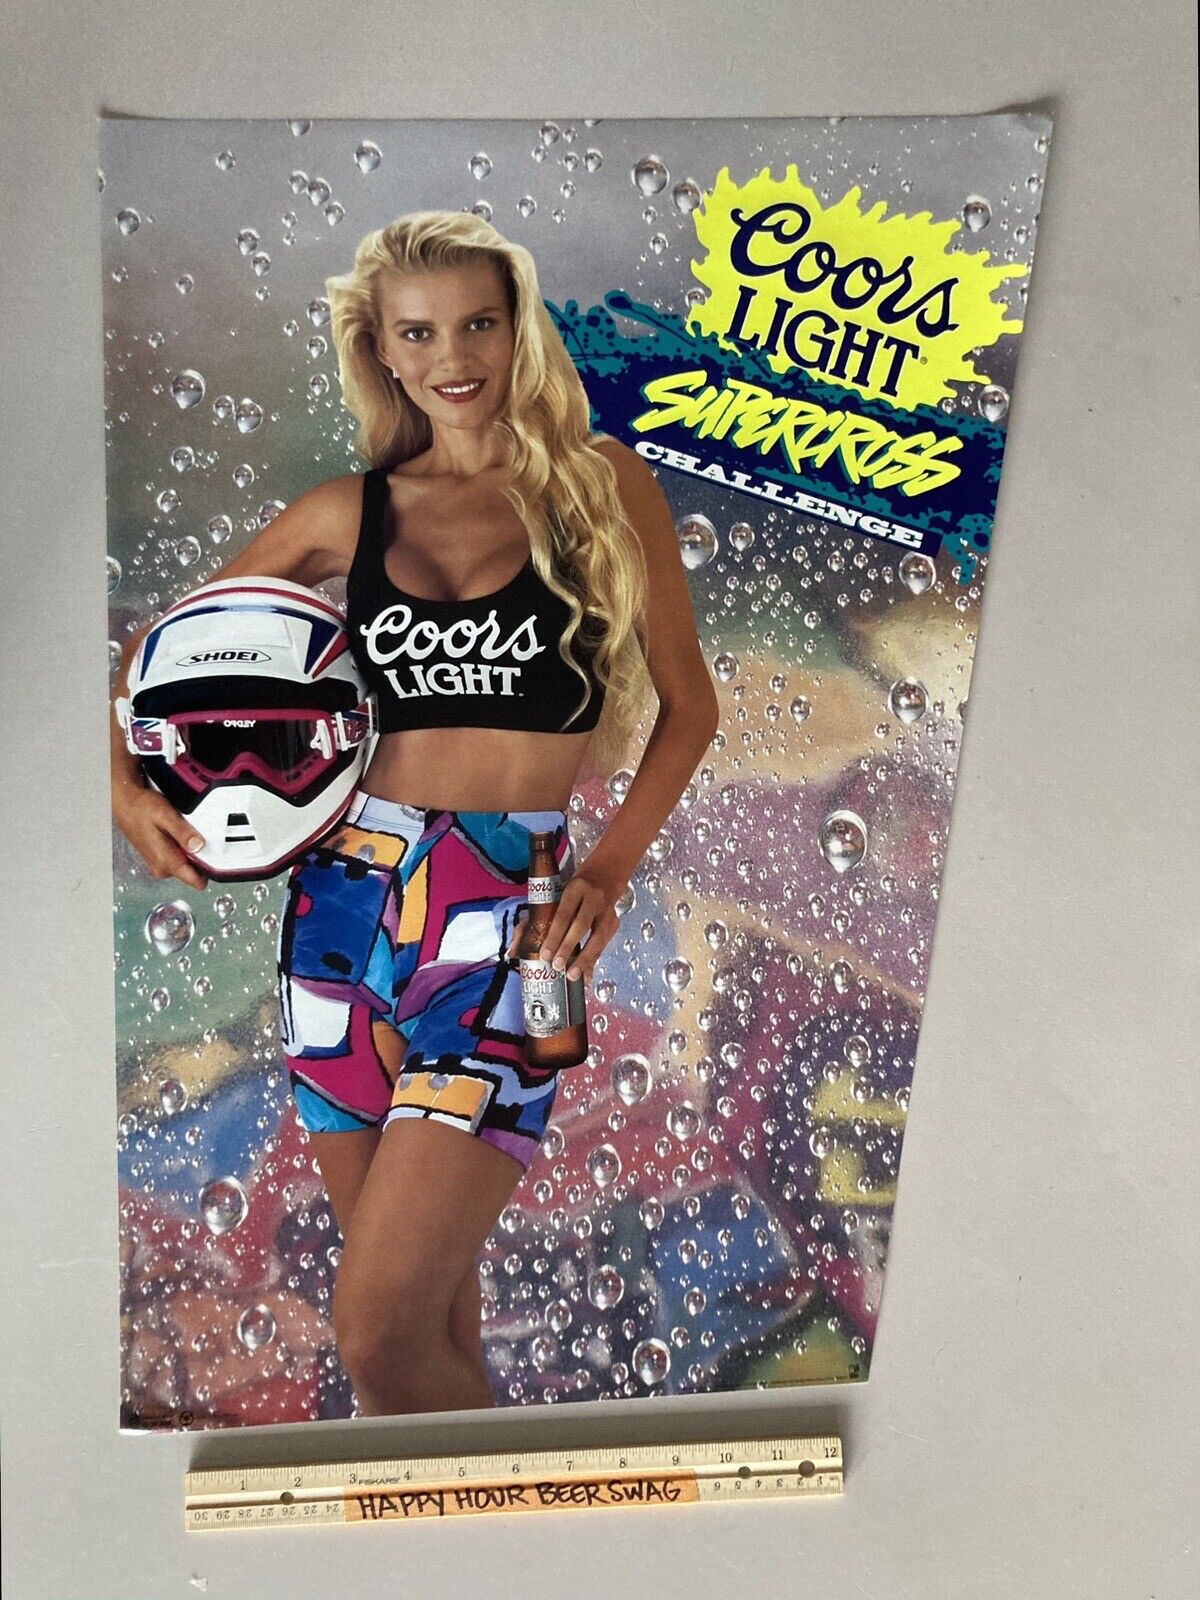 🔥 NOS 1992 Vintage Coors Light Beer Model Hot Girl Rare Poster Sexy Blonde